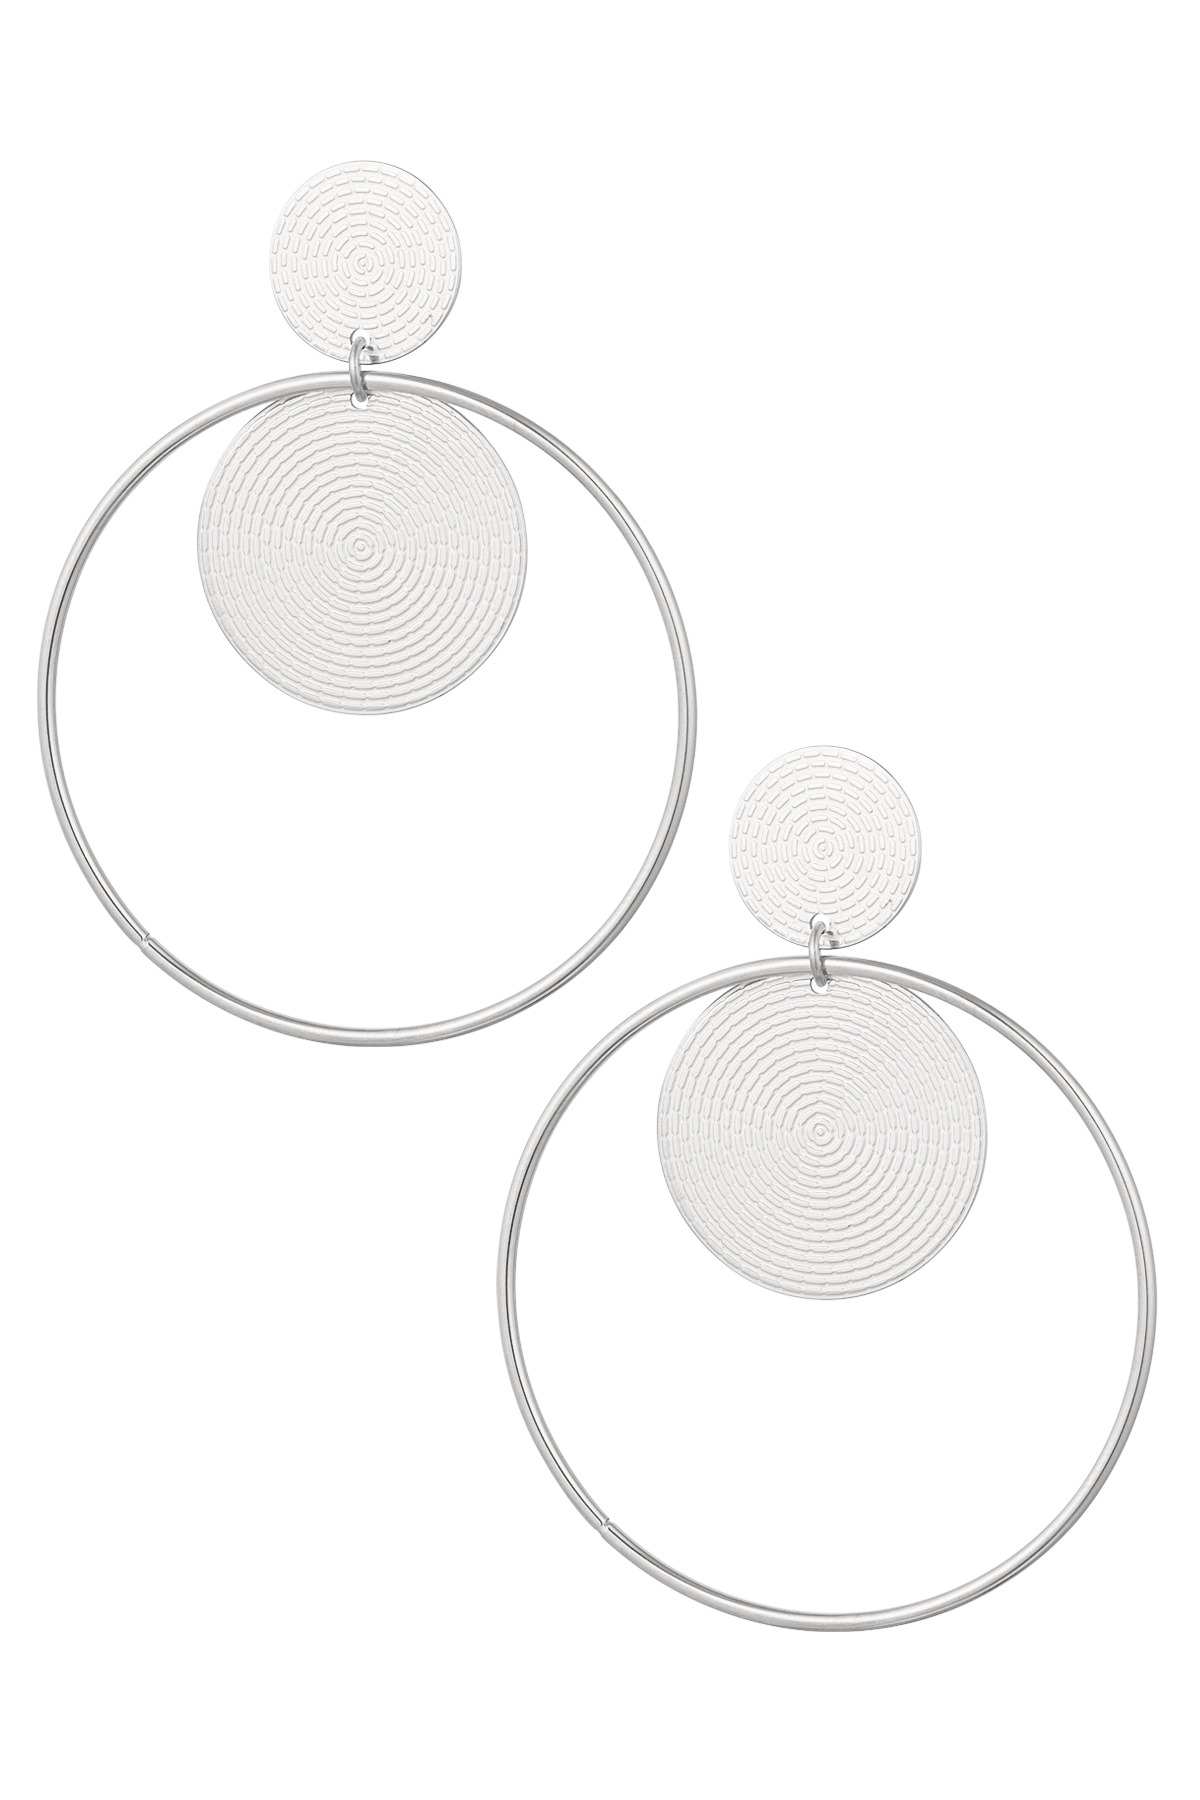 Earrings round & round - silver Stainless Steel h5 